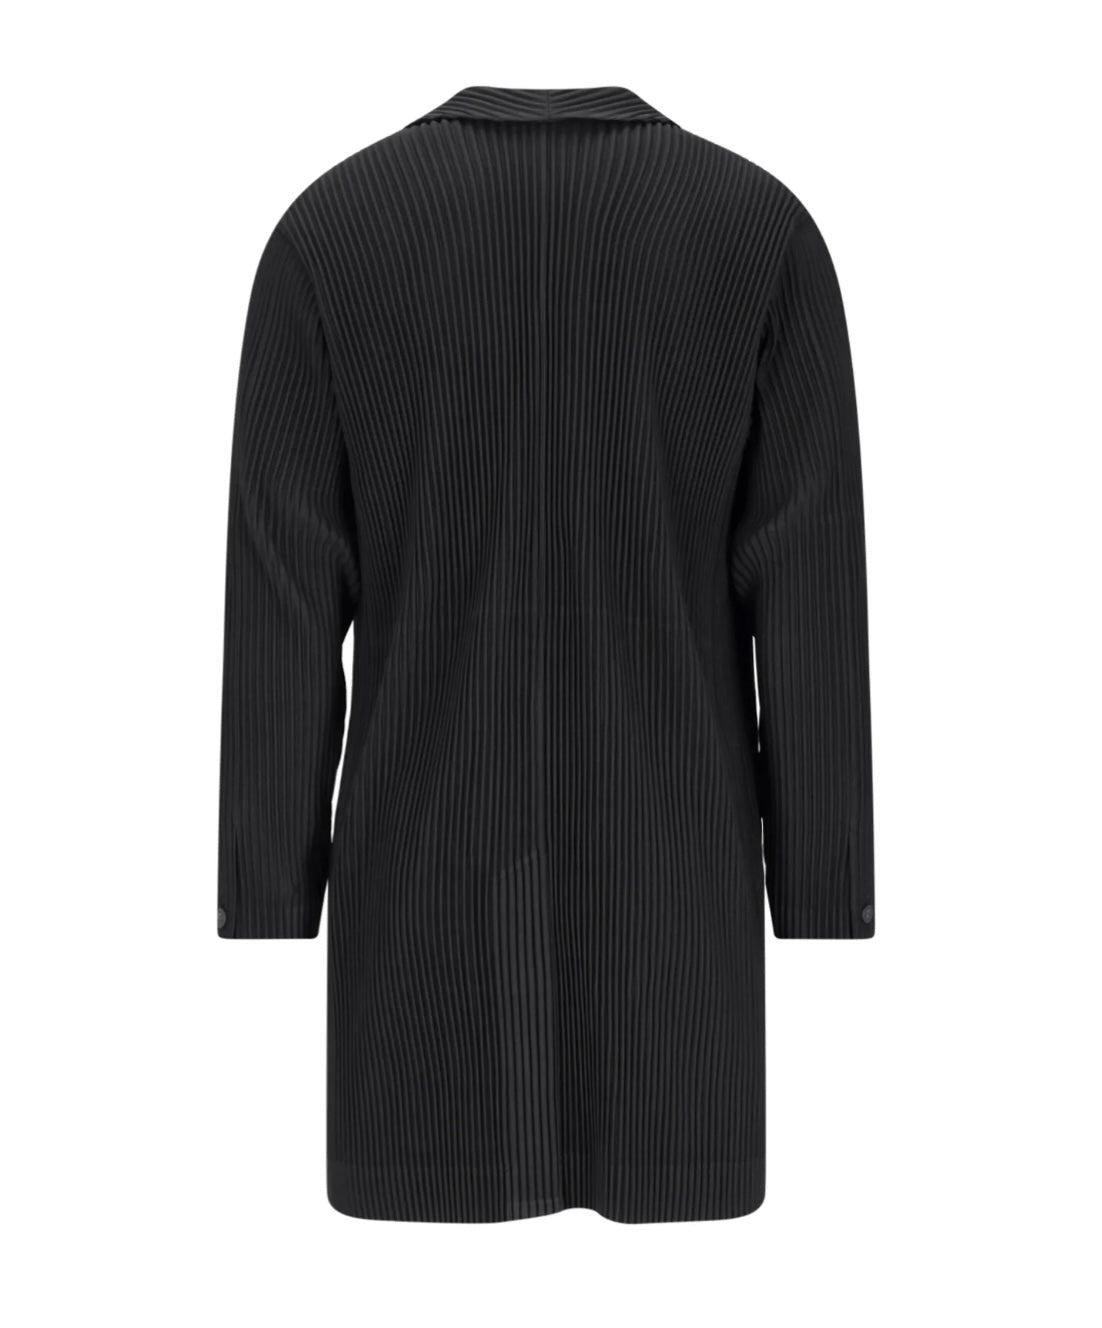 Homme Plissé Issey Miyake - 
Homme Plissé Issey Miyake Single-Breasted Above-Knee Length Coat